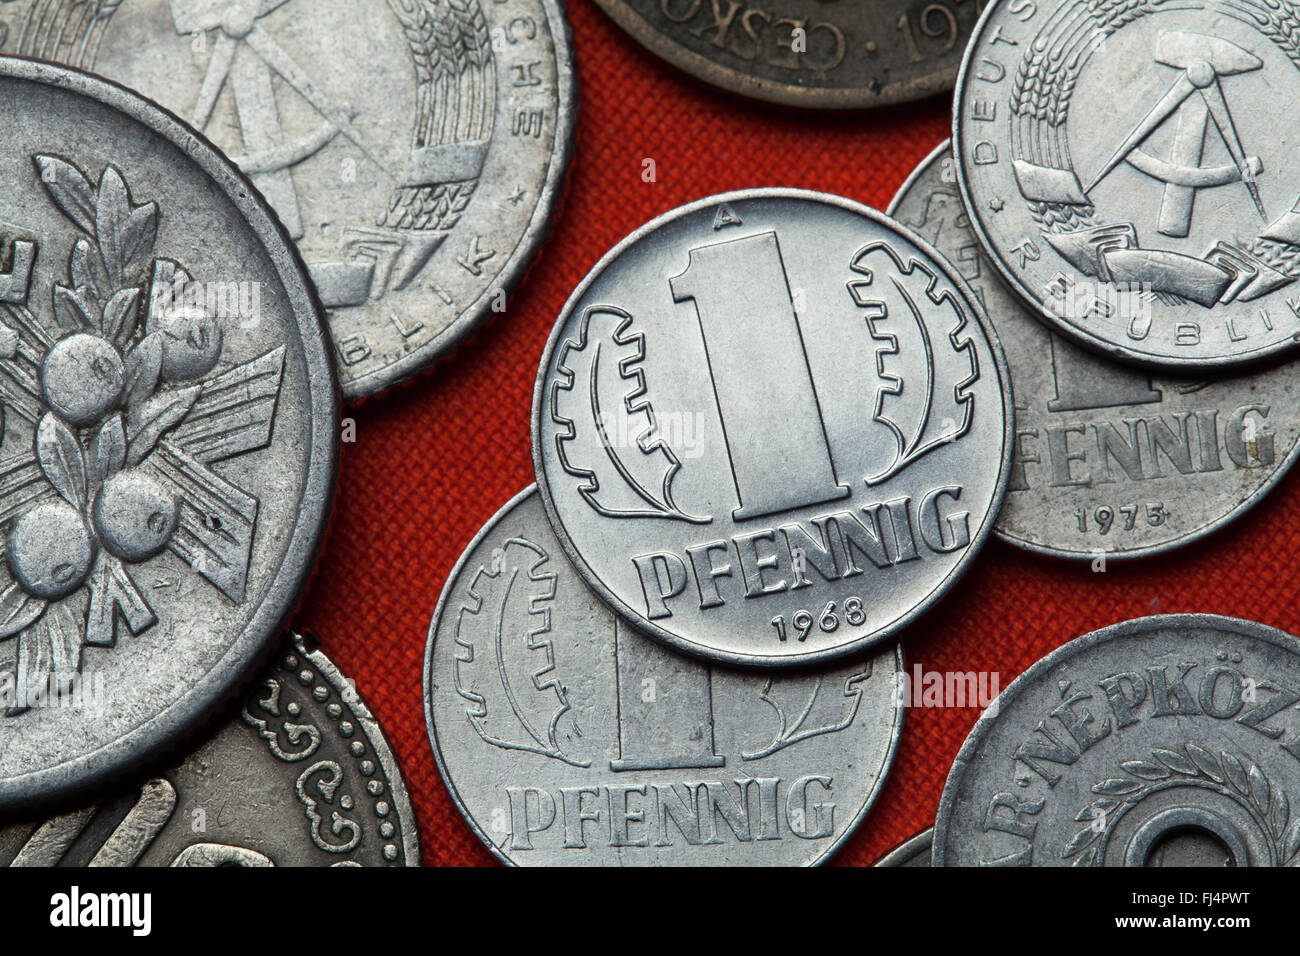 Coins of East Germany. East German one pfennig coin (1968) coined in the German Democratic Republic. Stock Photo